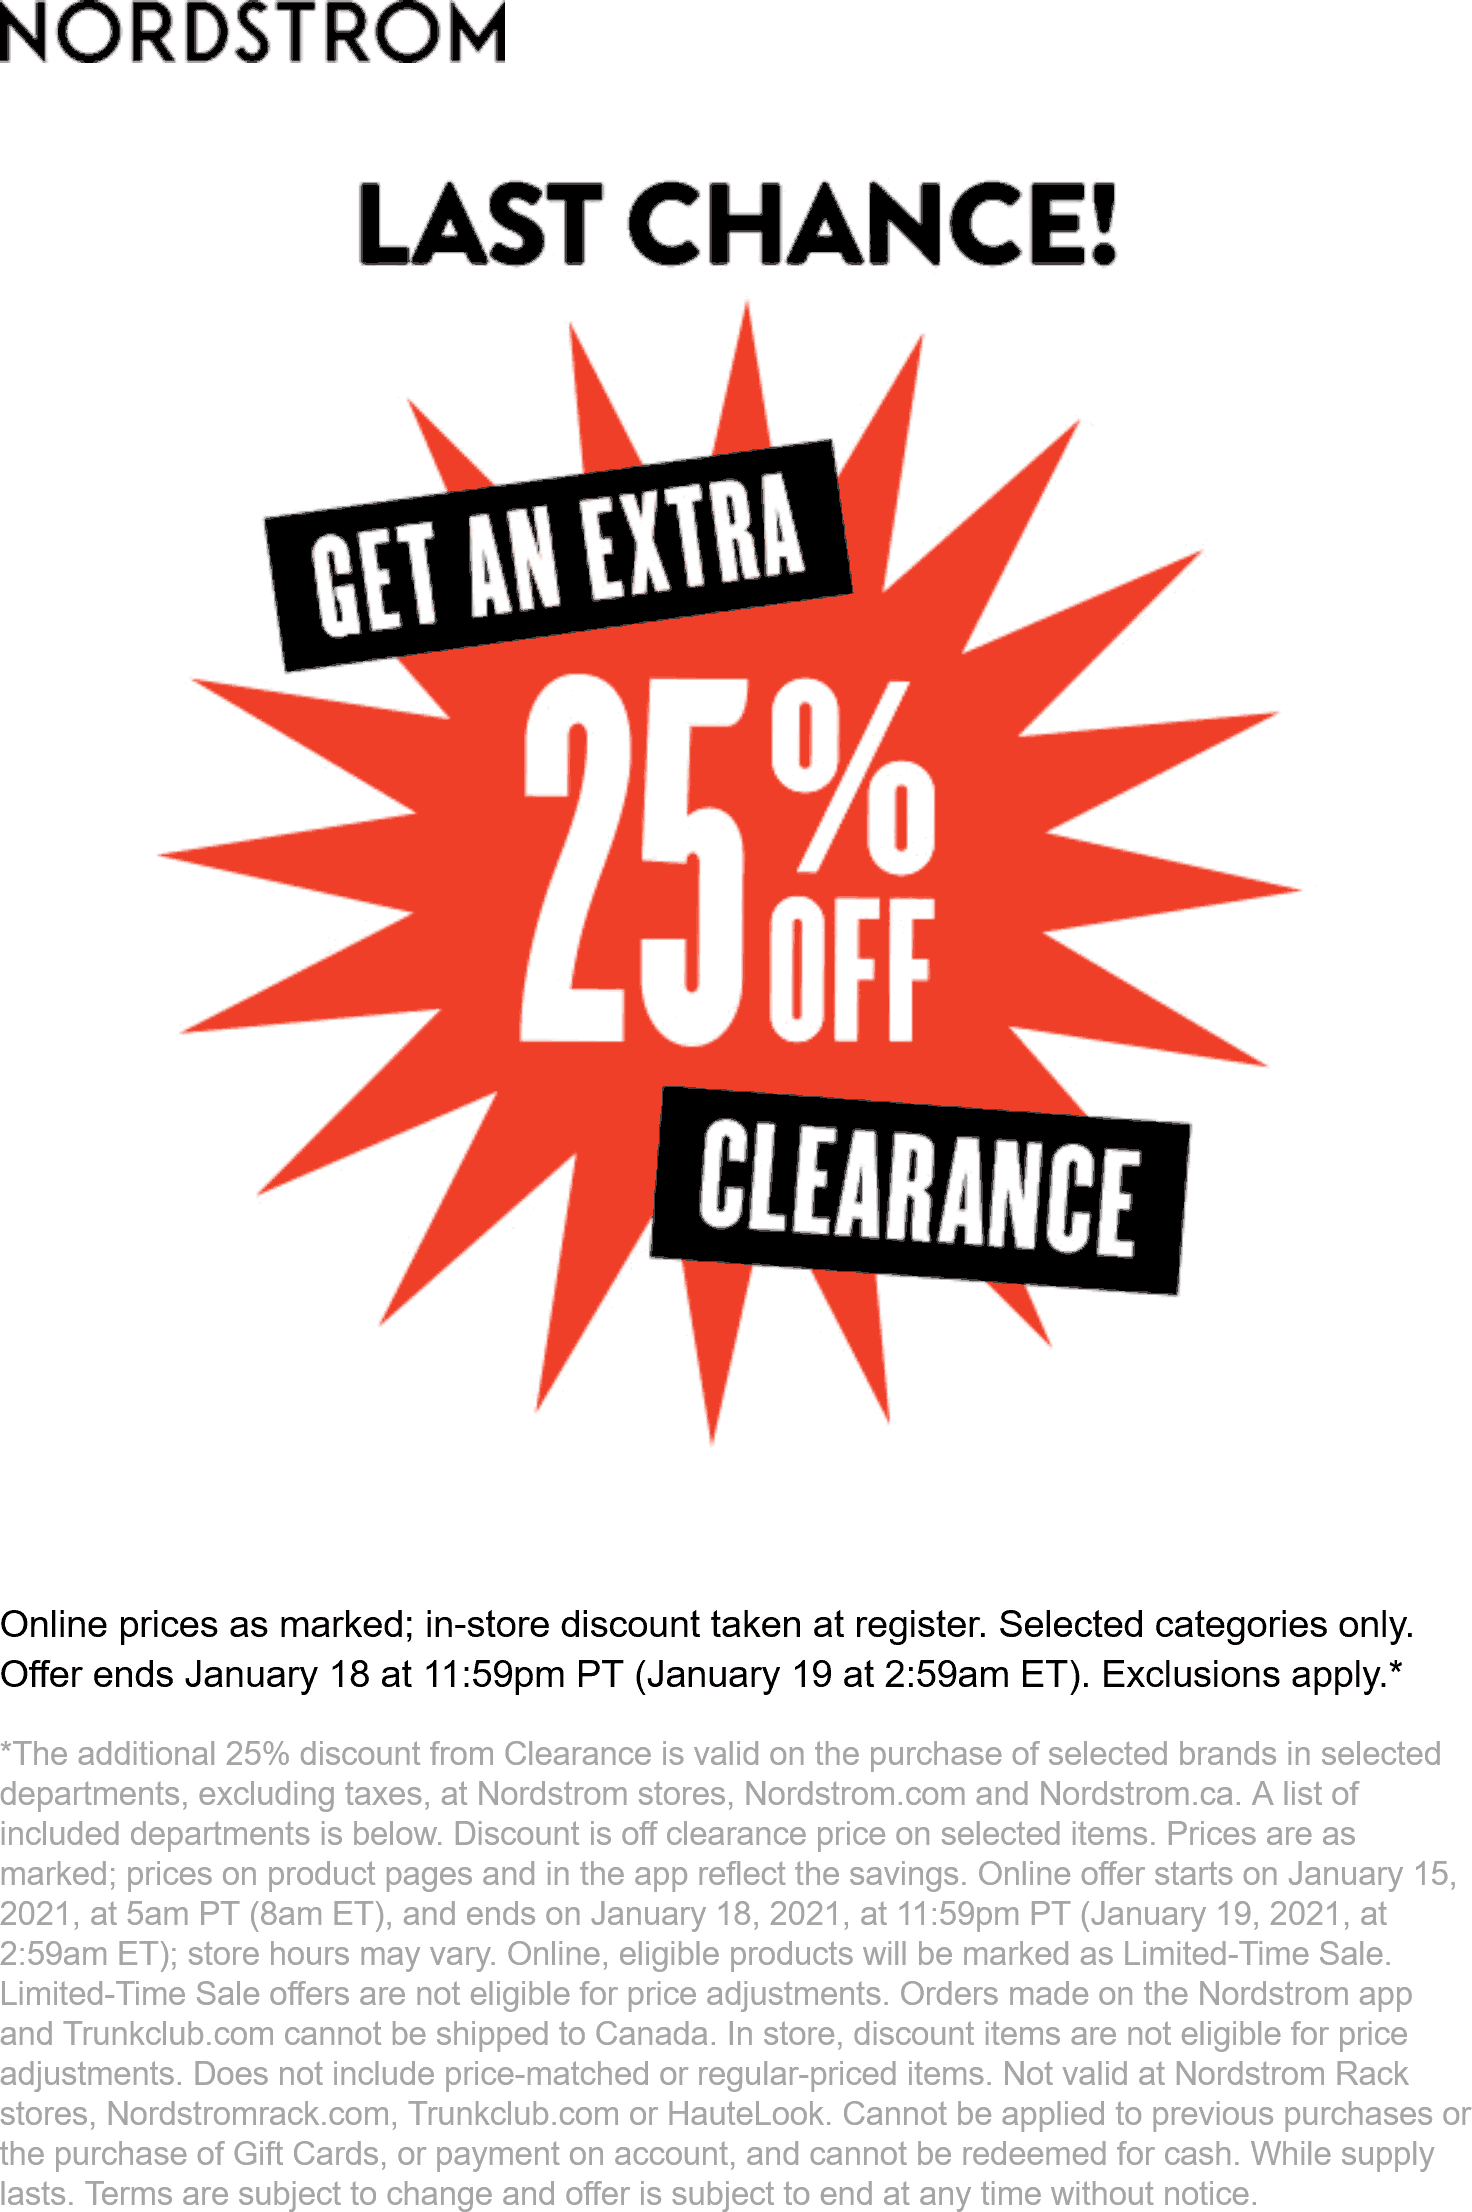 Nordstrom stores Coupon  Extra 25% off clearance today at Nordstrom #nordstrom 